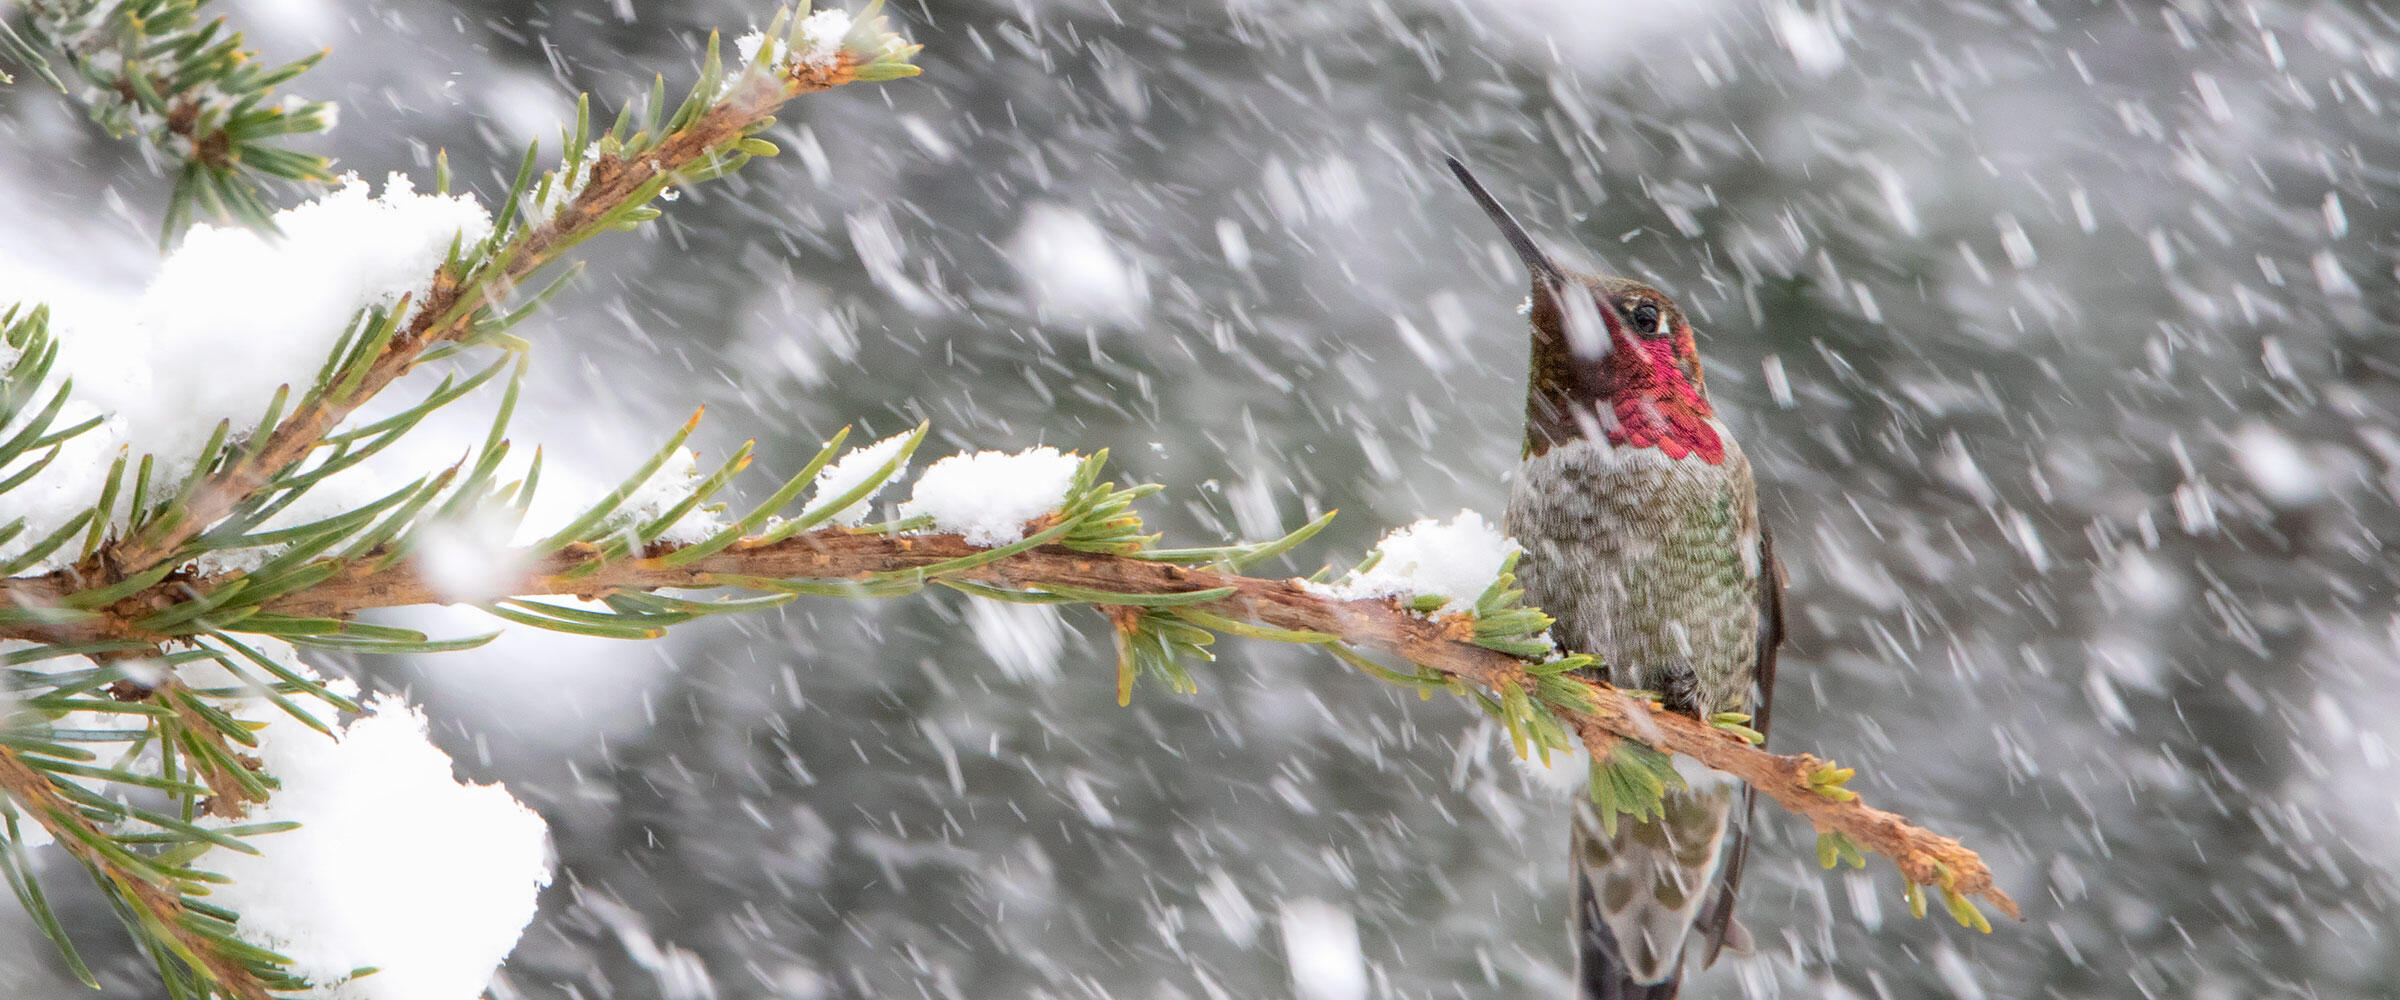 Male Anna's Hummingbird perched on a fir branch during a snowstorm.